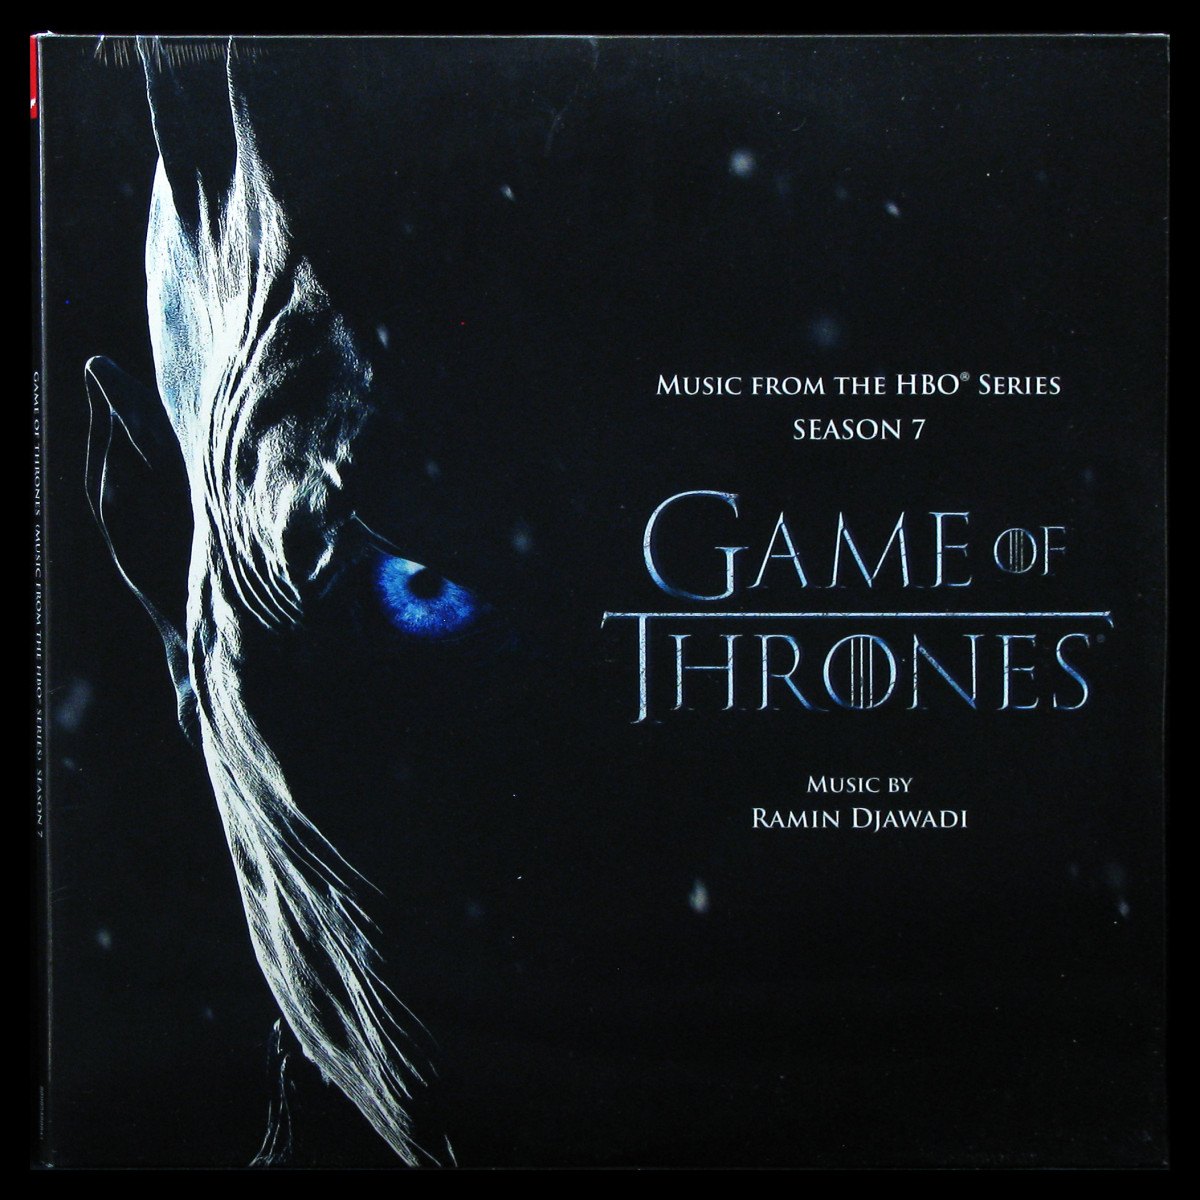 Game Of Thrones (Music From The HBO Series) Season 7